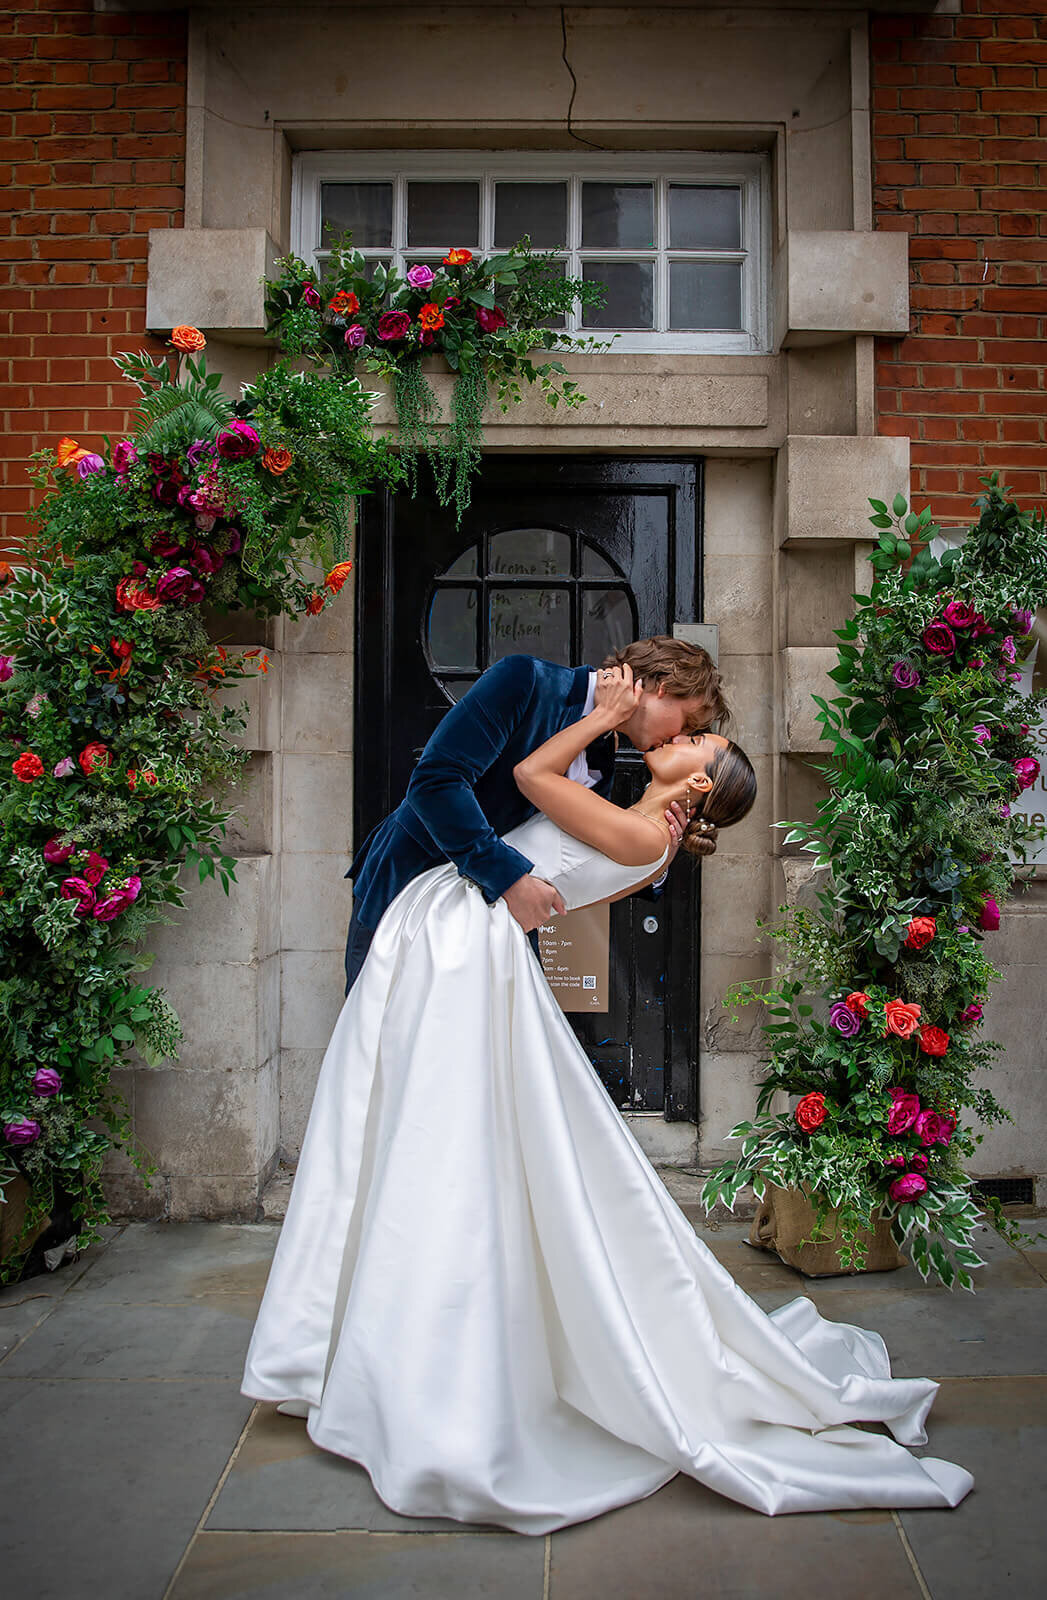 Bride and groom having a dip kiss infront of Chelsea Registry Office